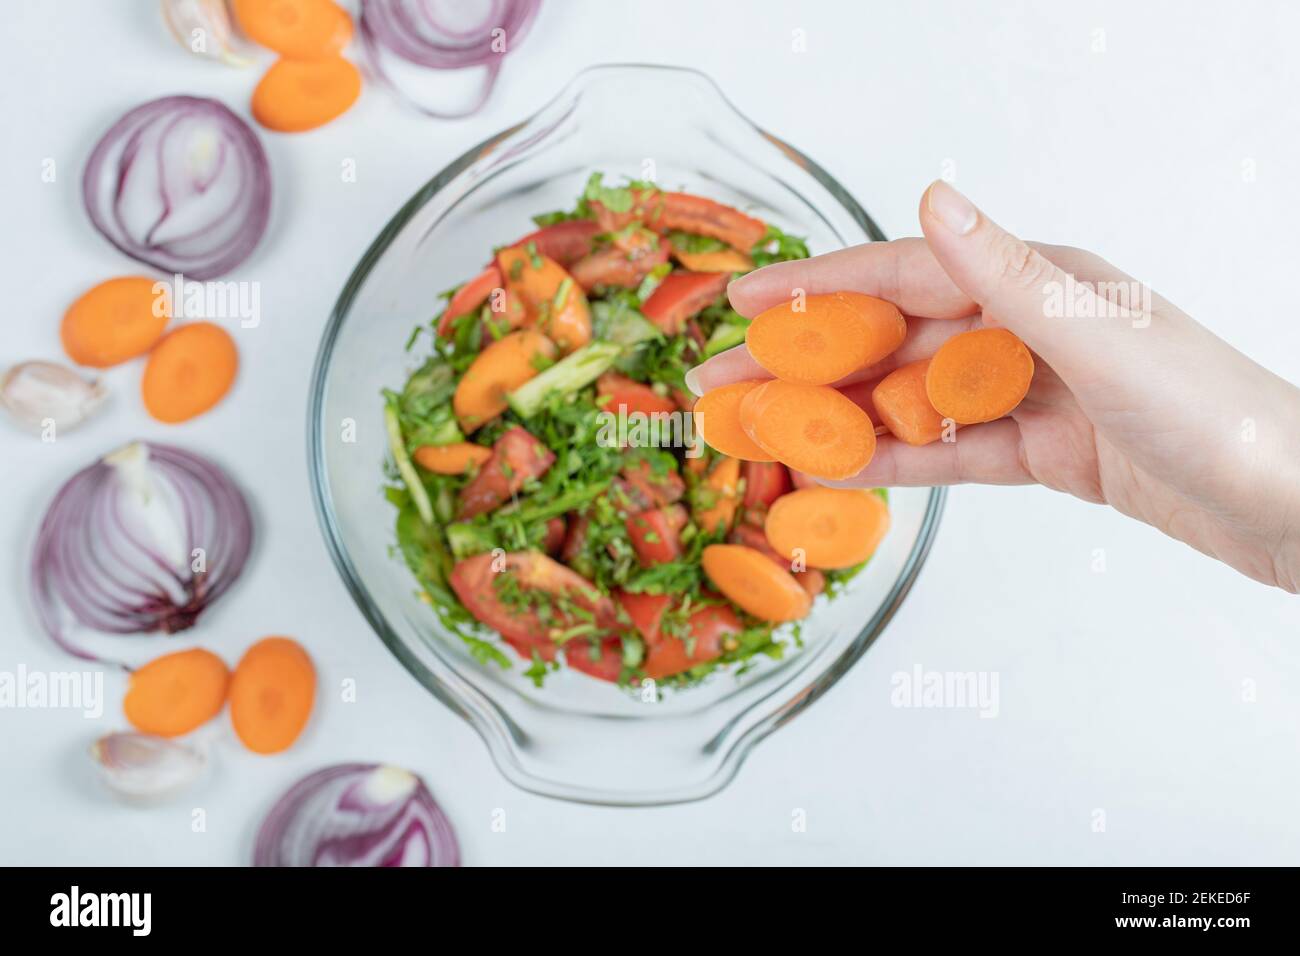 A glass plate of delicious vegetable salad Stock Photo